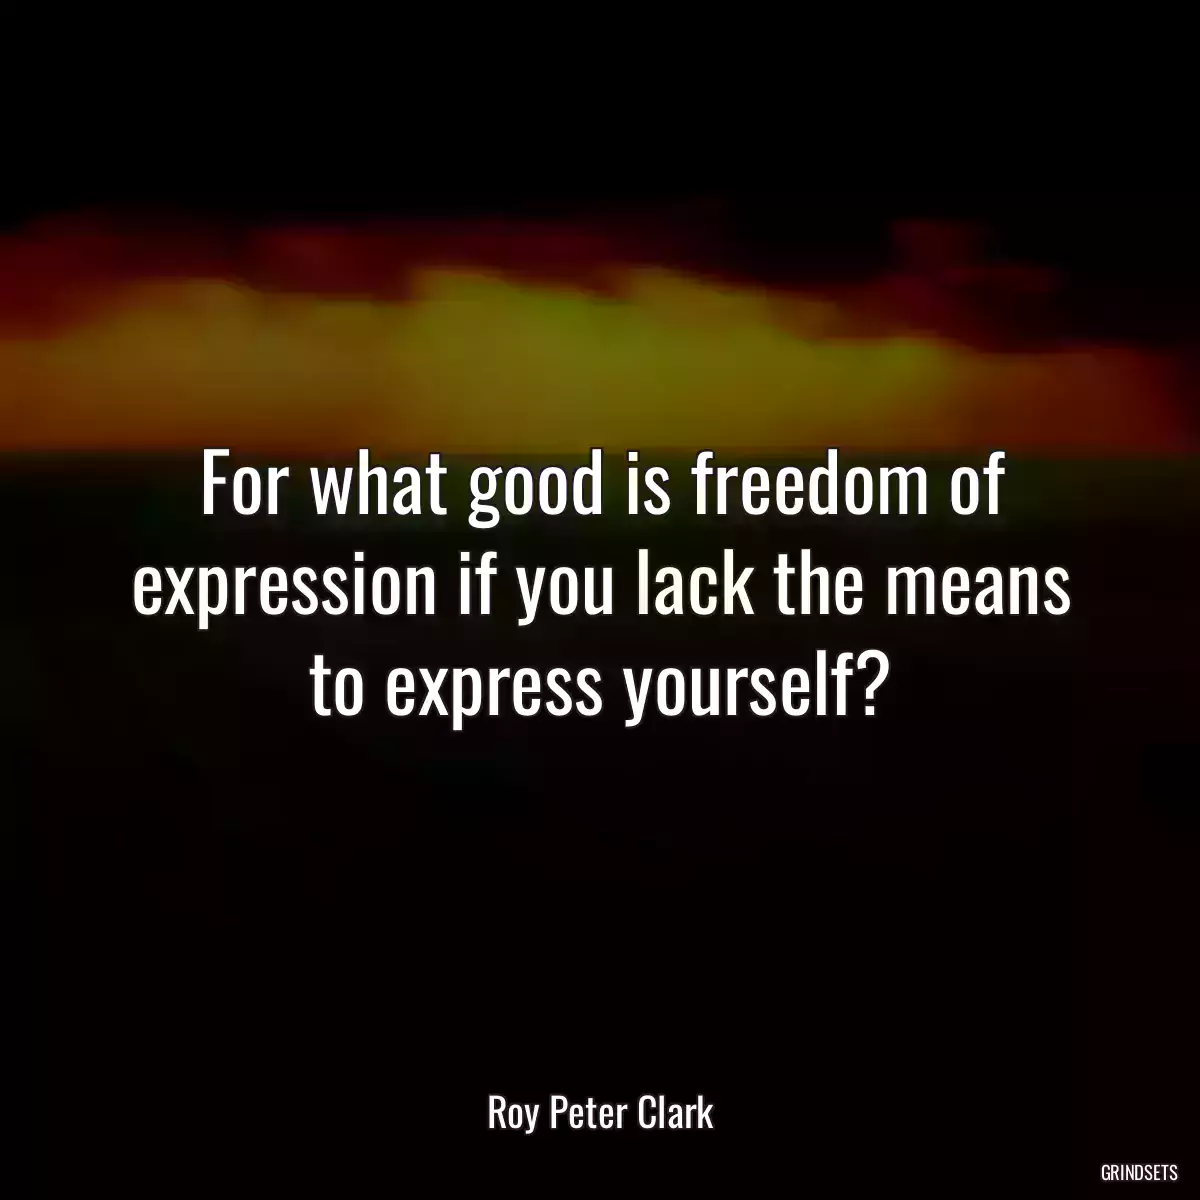 For what good is freedom of expression if you lack the means to express yourself?